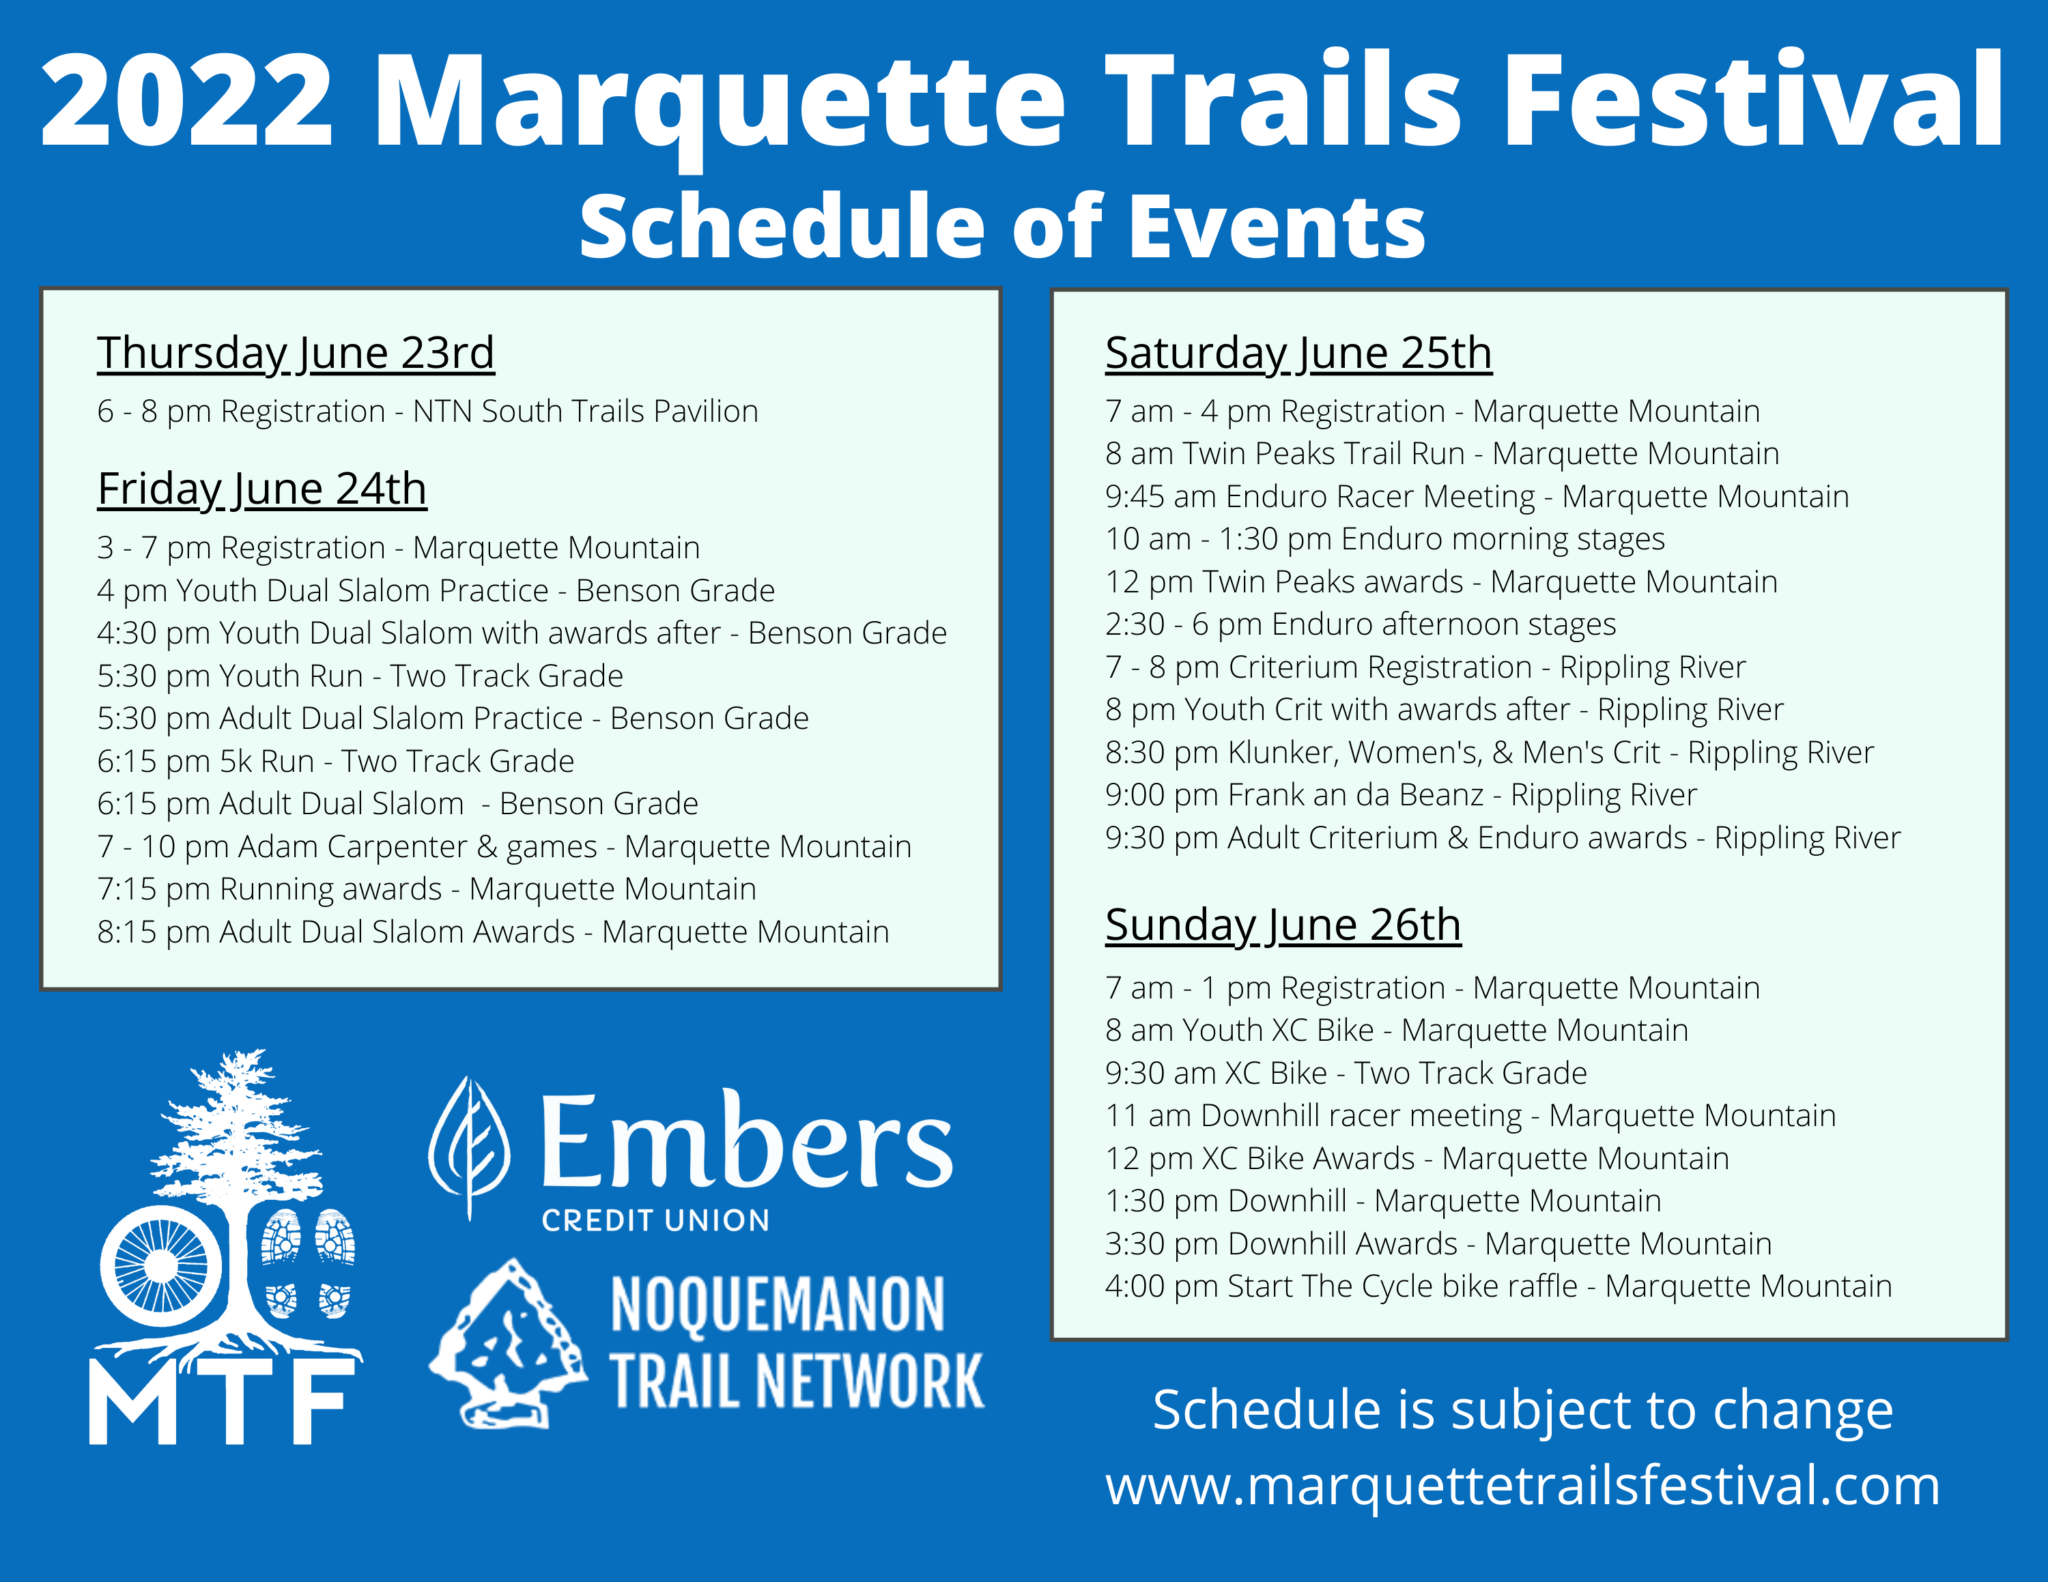 SCHEDULE OF EVENTS MARQUETTE TRAILS FEST